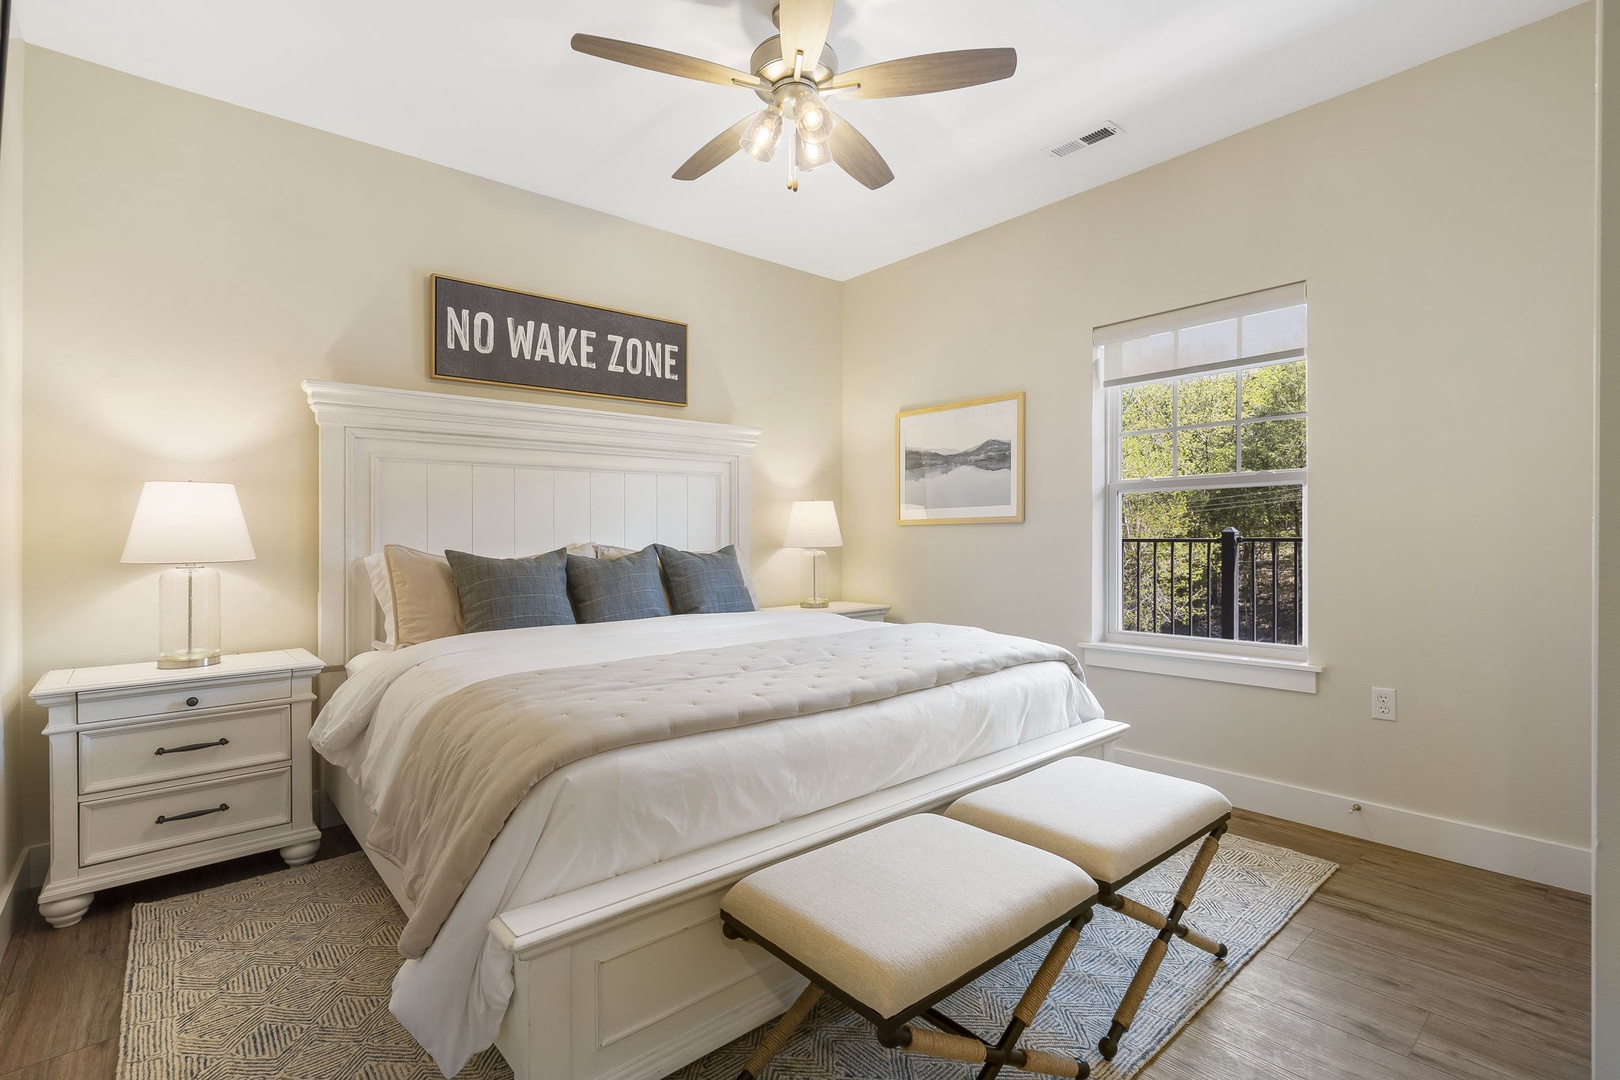 Escape to the additional King Bedroom with TV and Ceiling Fan